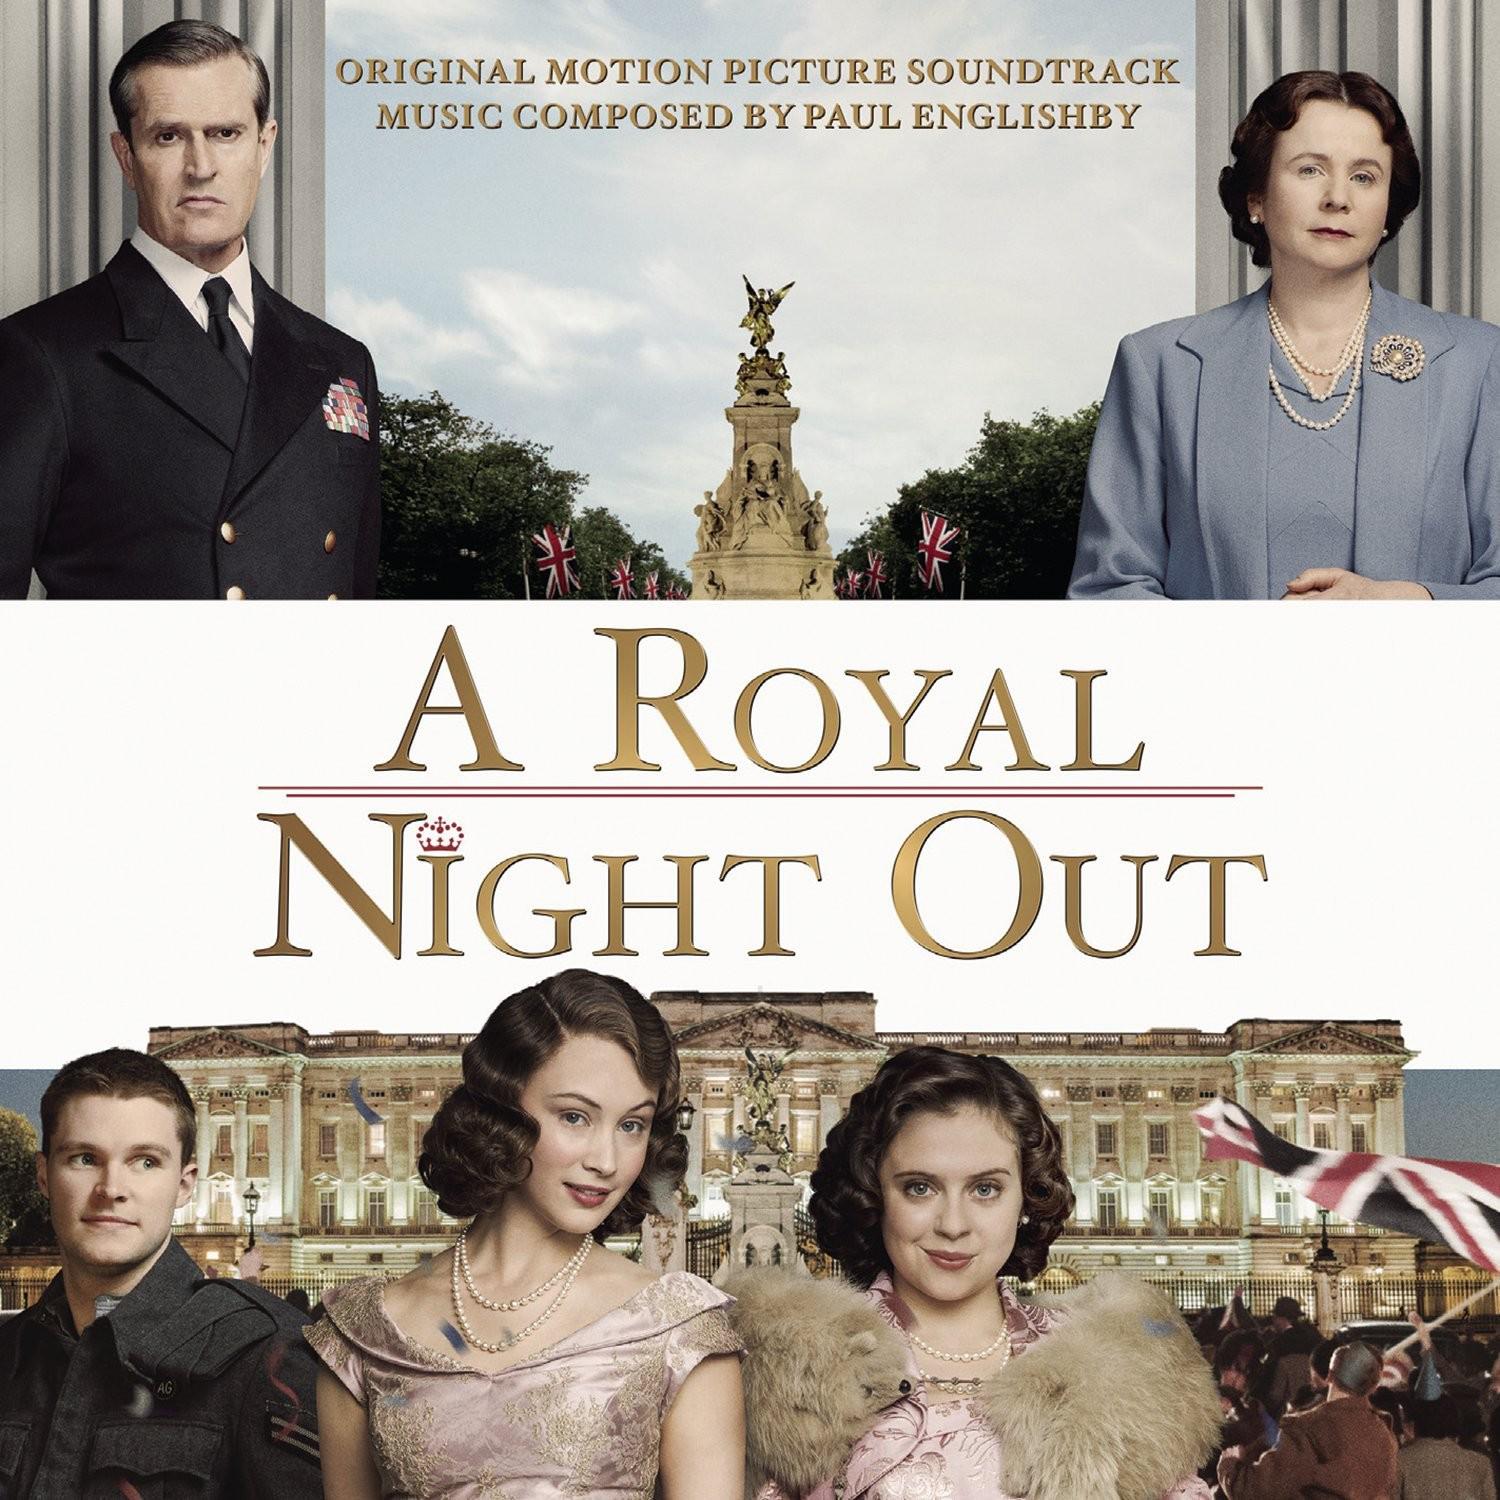 A Royal Night Out Movie Review